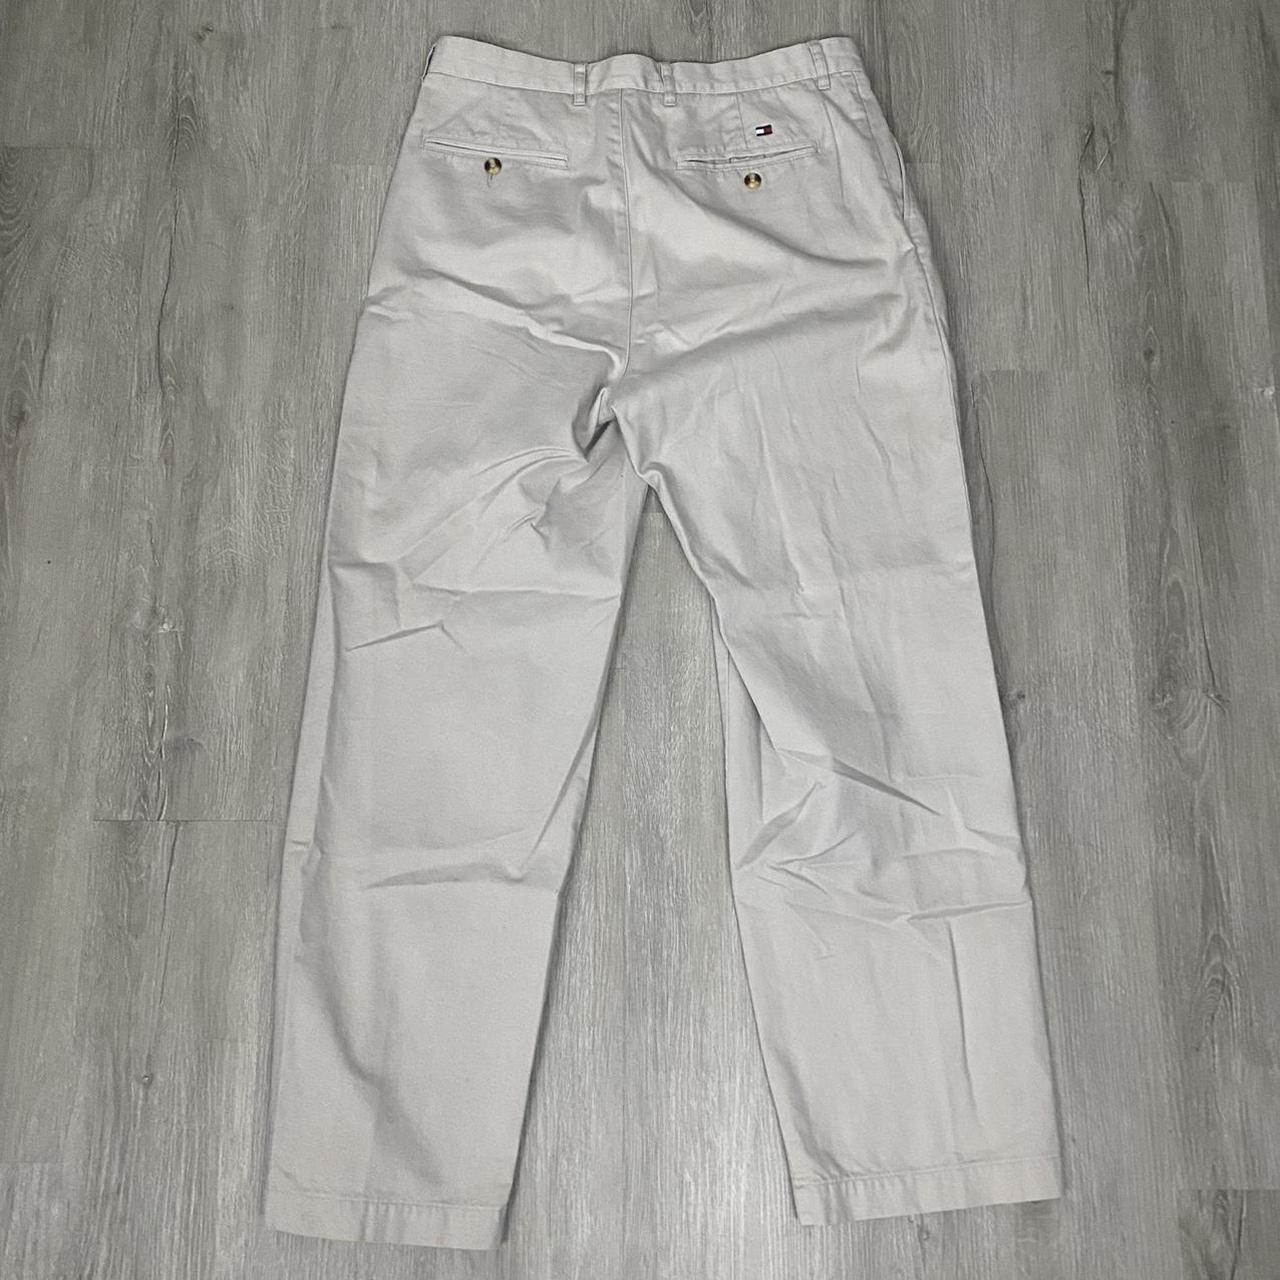 Product Image 1 - Vintage Tommy Hilfiger pants 34x32
In